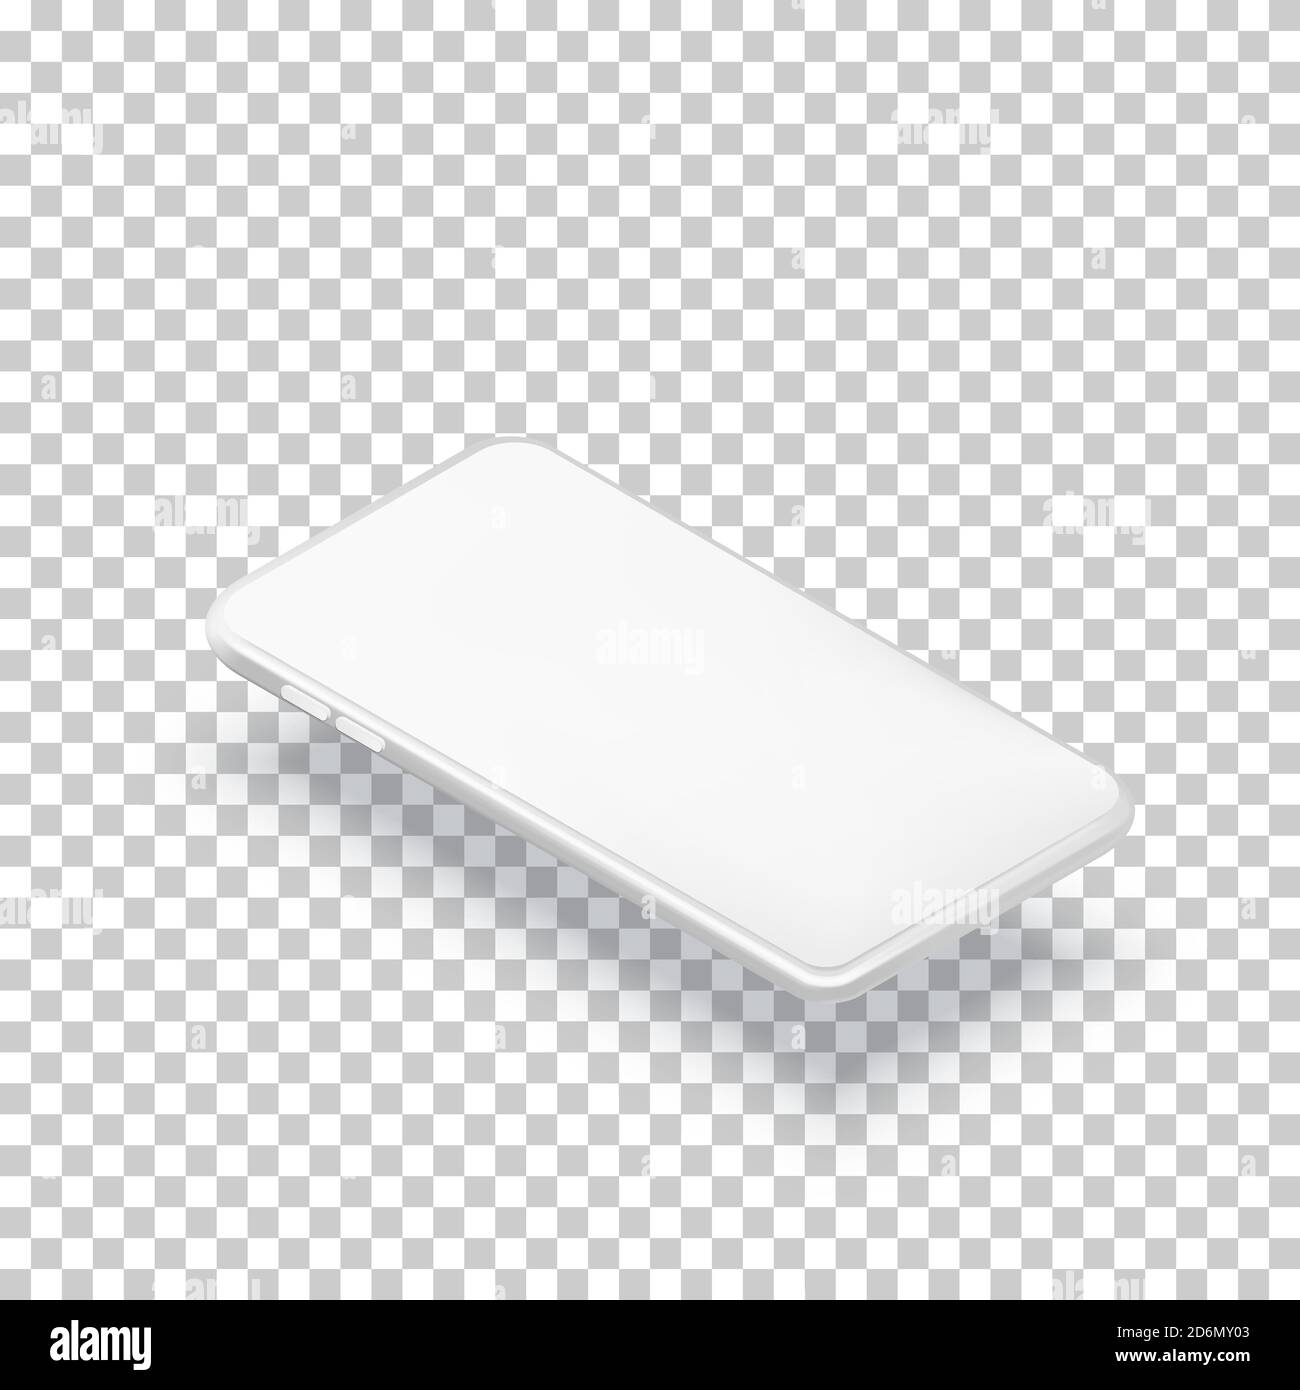 Smartphone horizontal mockup design template. Vector realistic 3d isometric illustration of white plastic mobile phone on transparent background. Blan Stock Vector